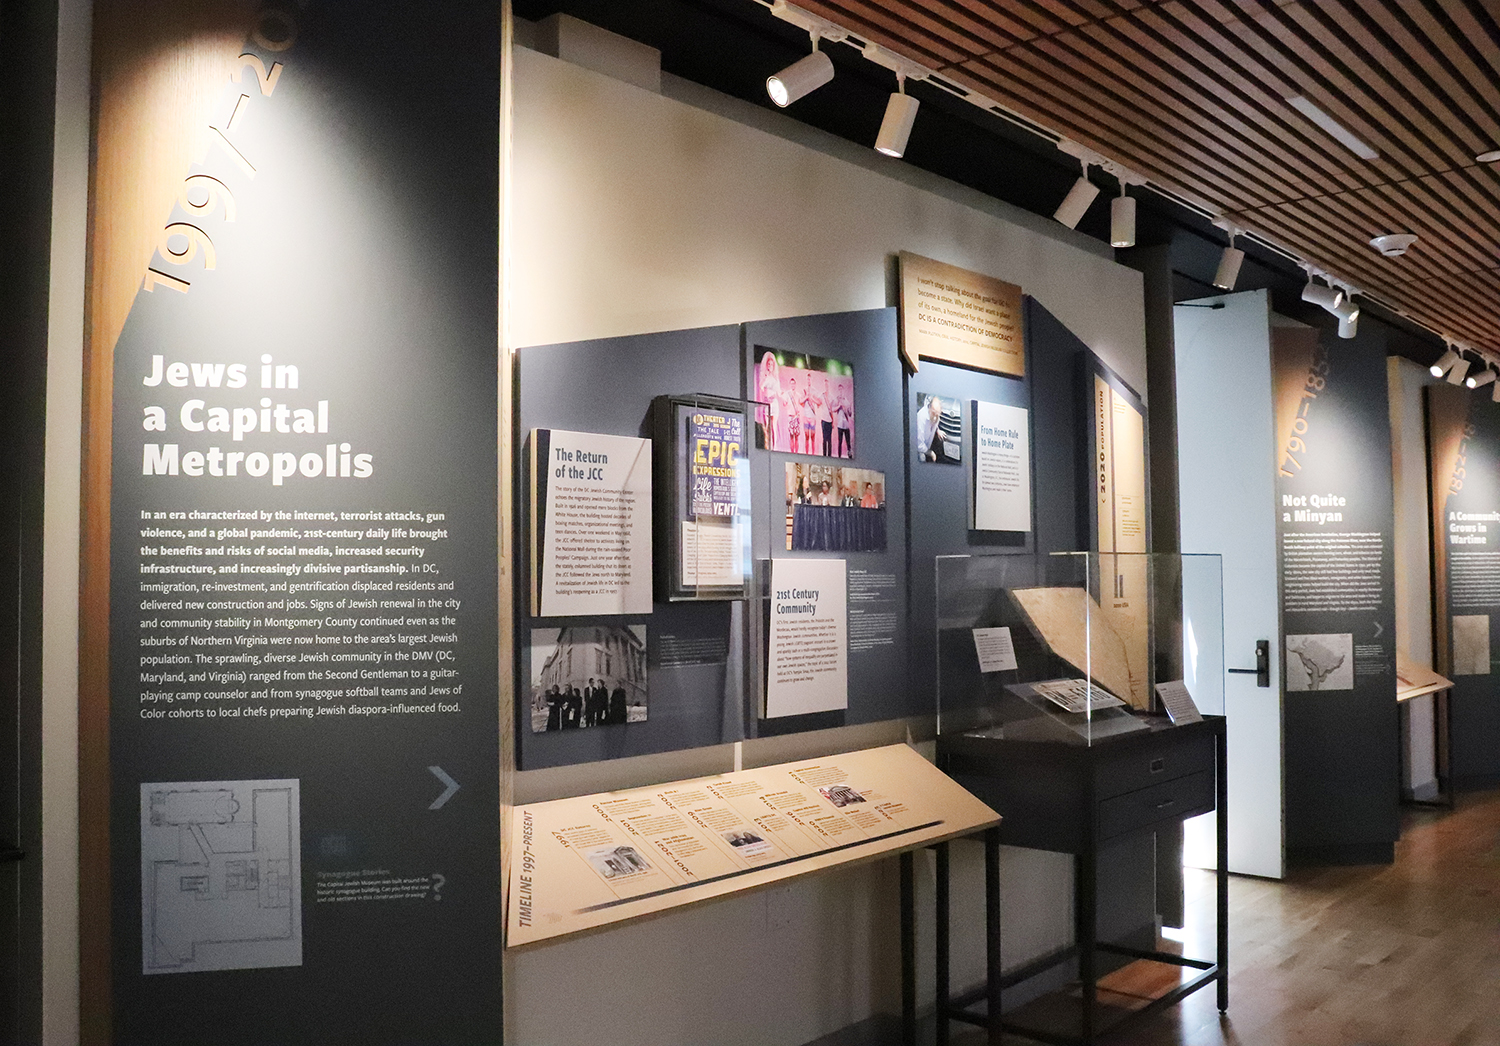 An exhibition of the Capital Jewish Museum in Washington, D.C., on June 1, 2023. RNS photo by Adelle M. Banks